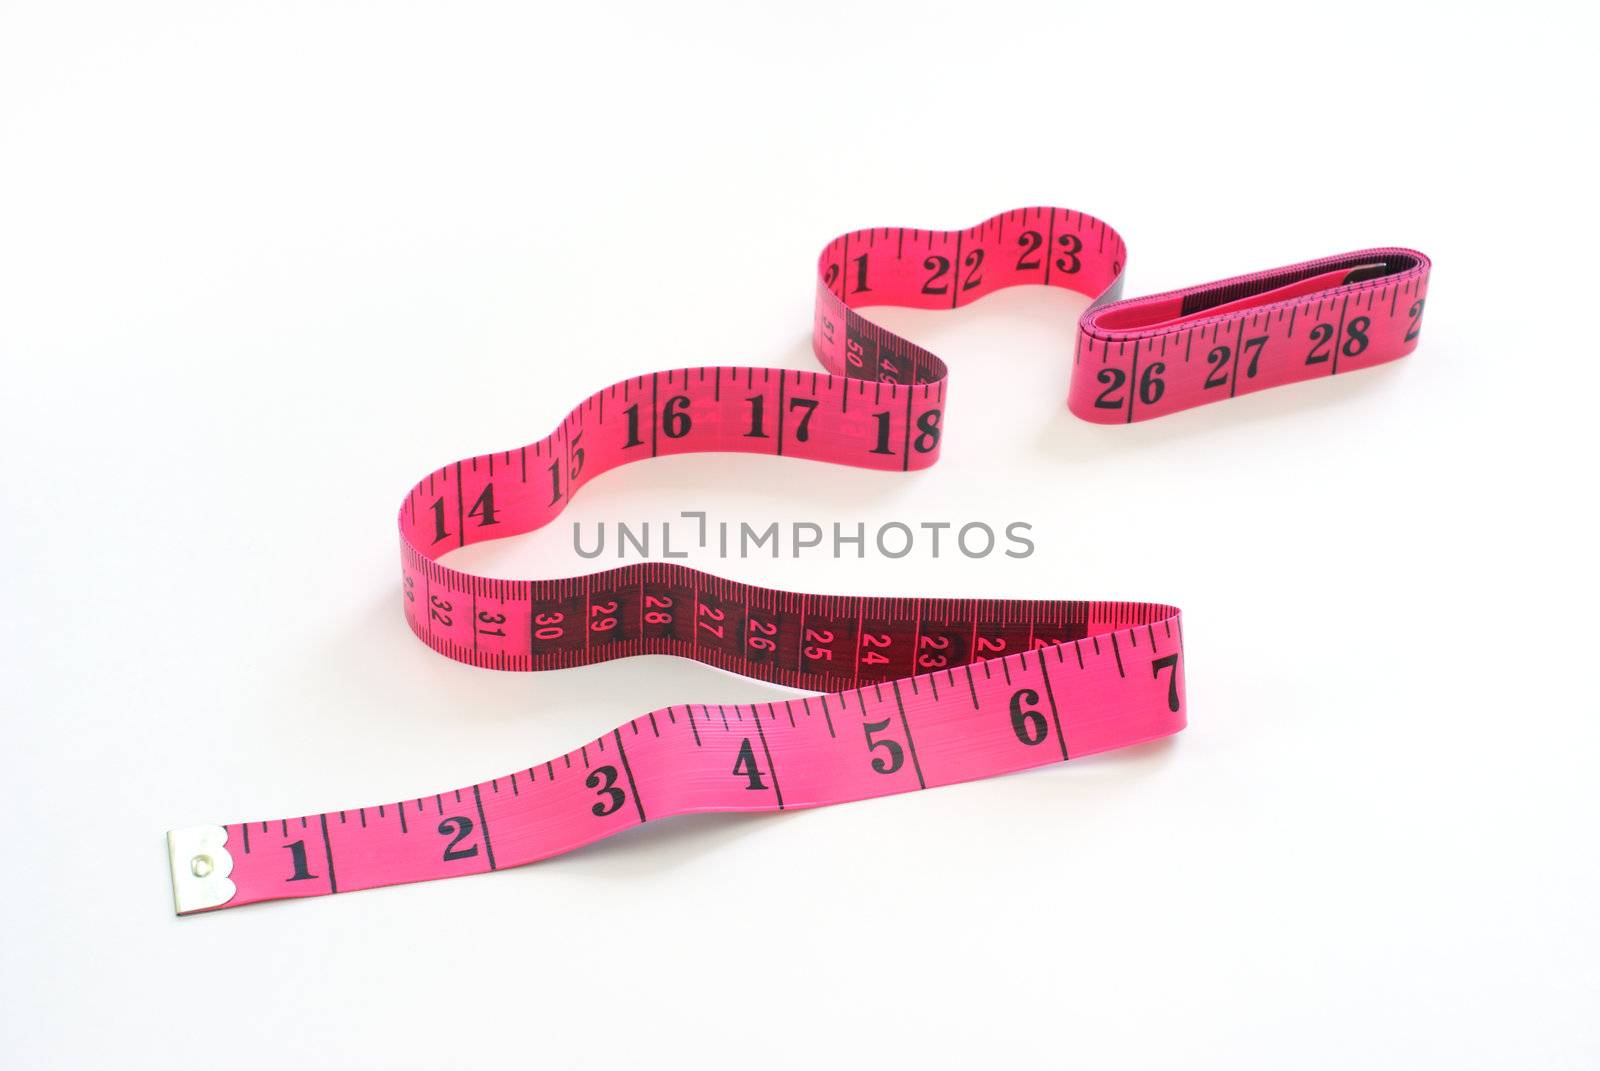 An isolated measuring tape on white background.